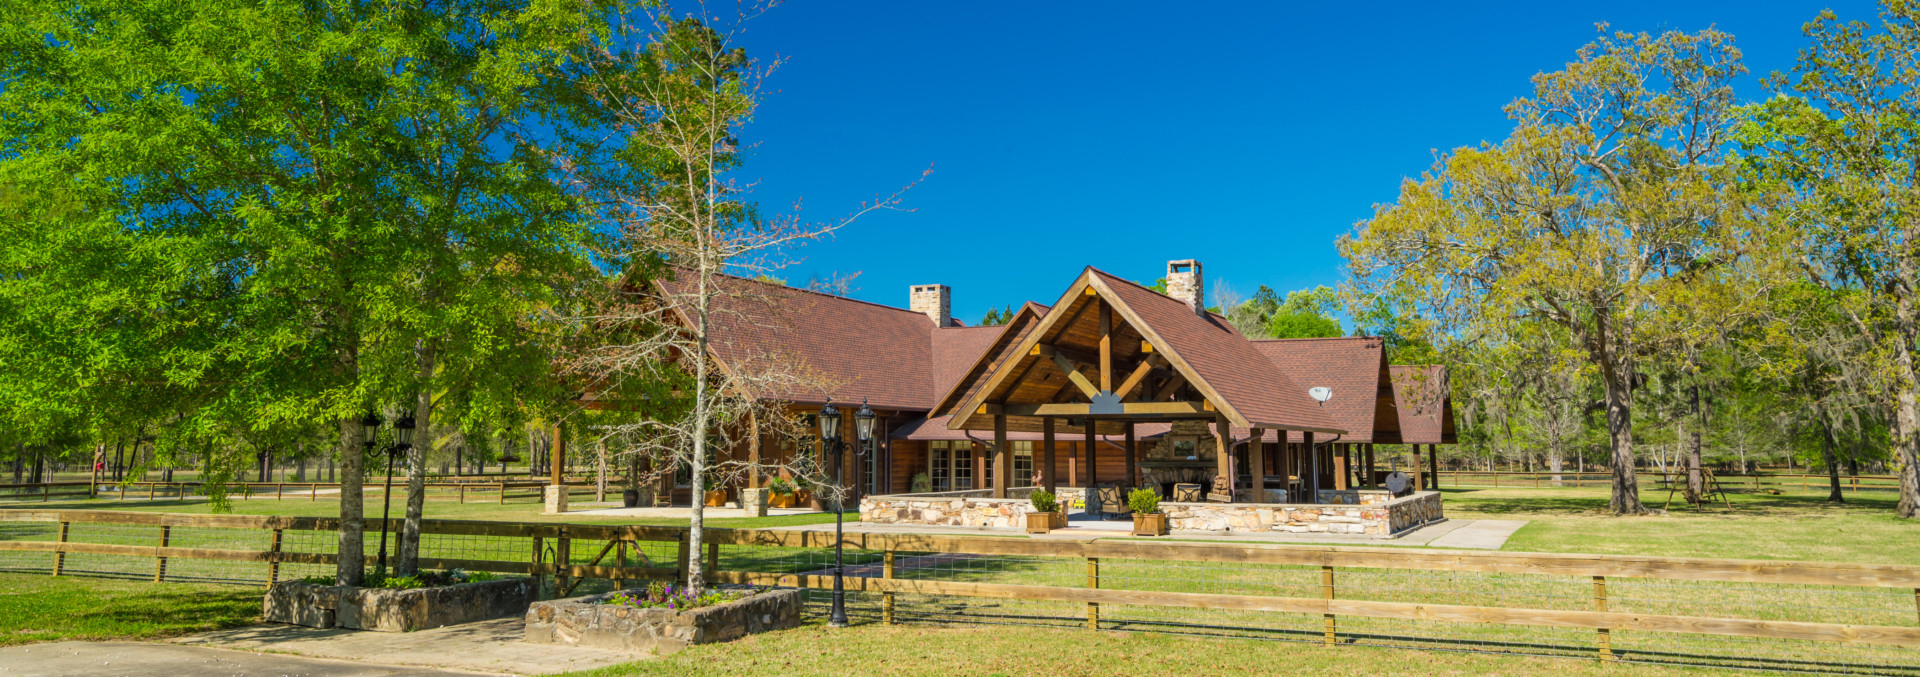 texas property for sale bear man bluff ranch